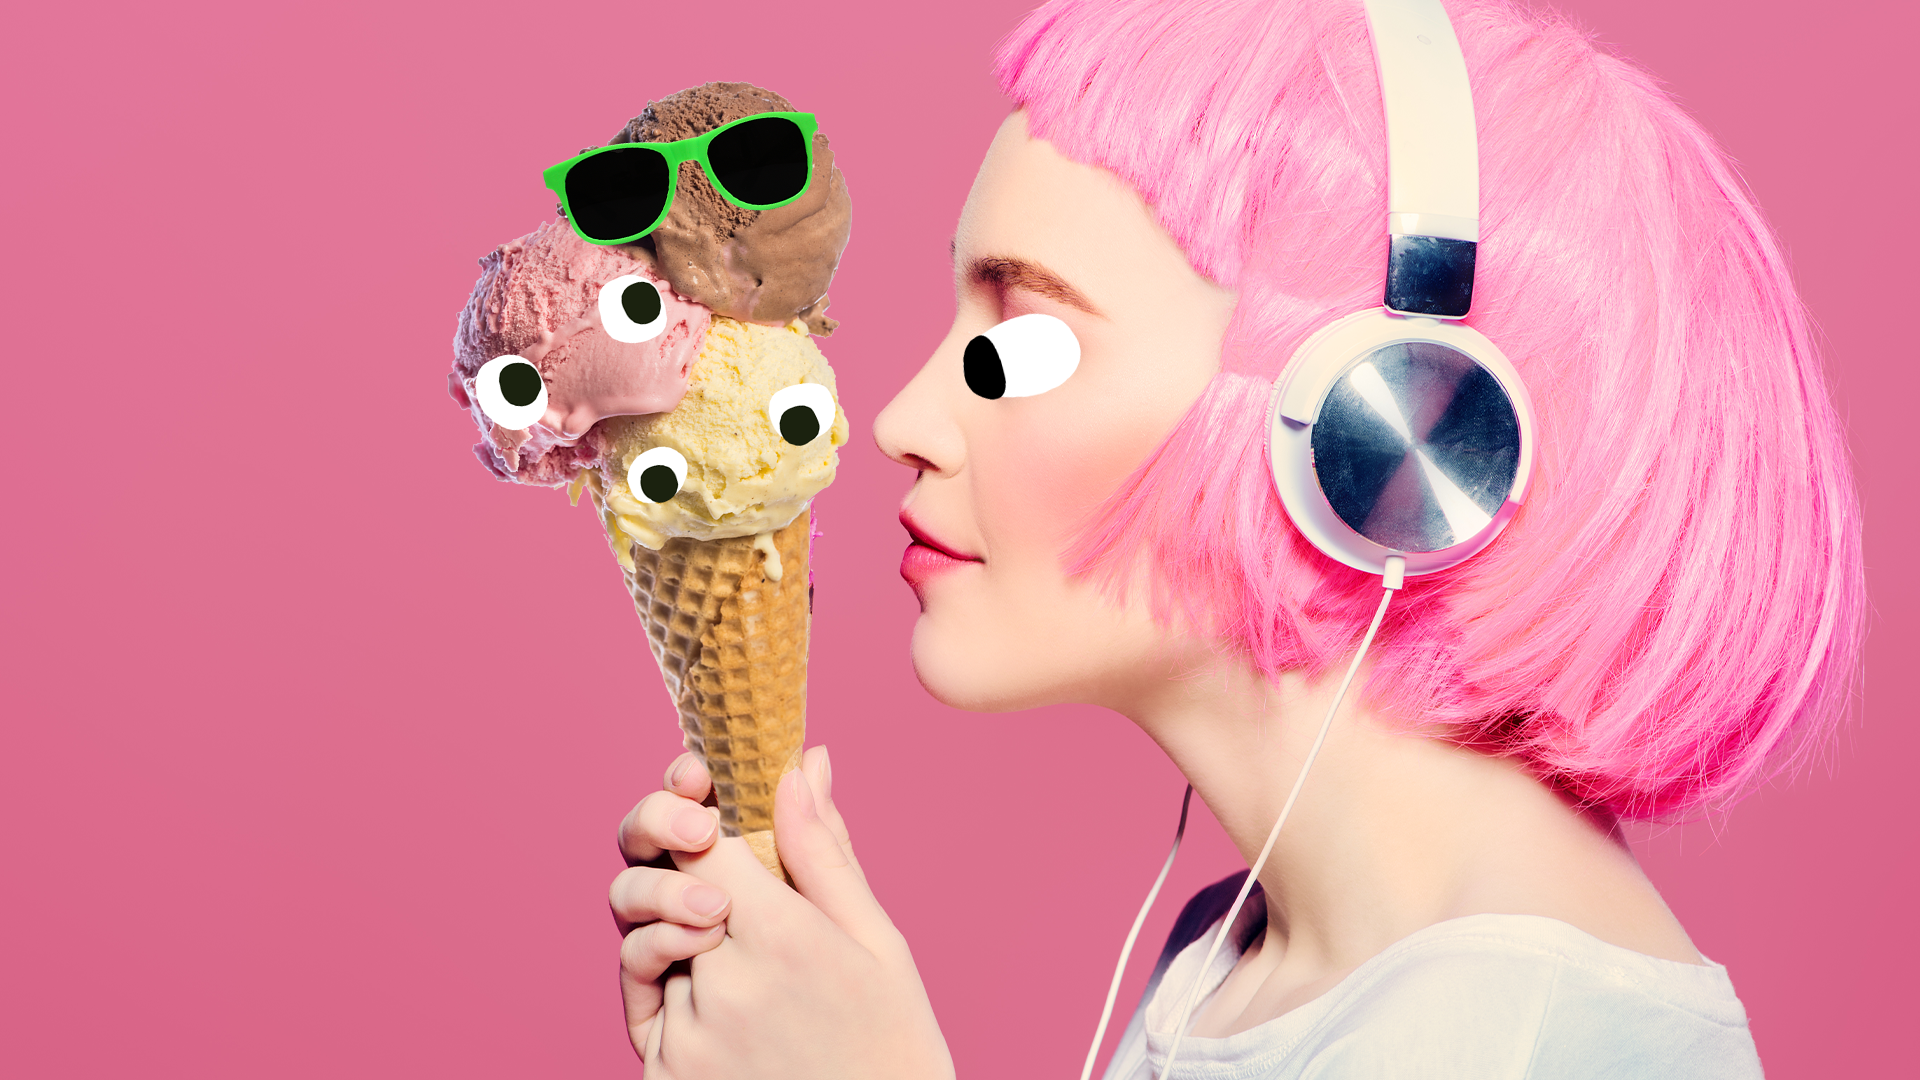 A woman with pink hair looks at a triple scoop of ice cream